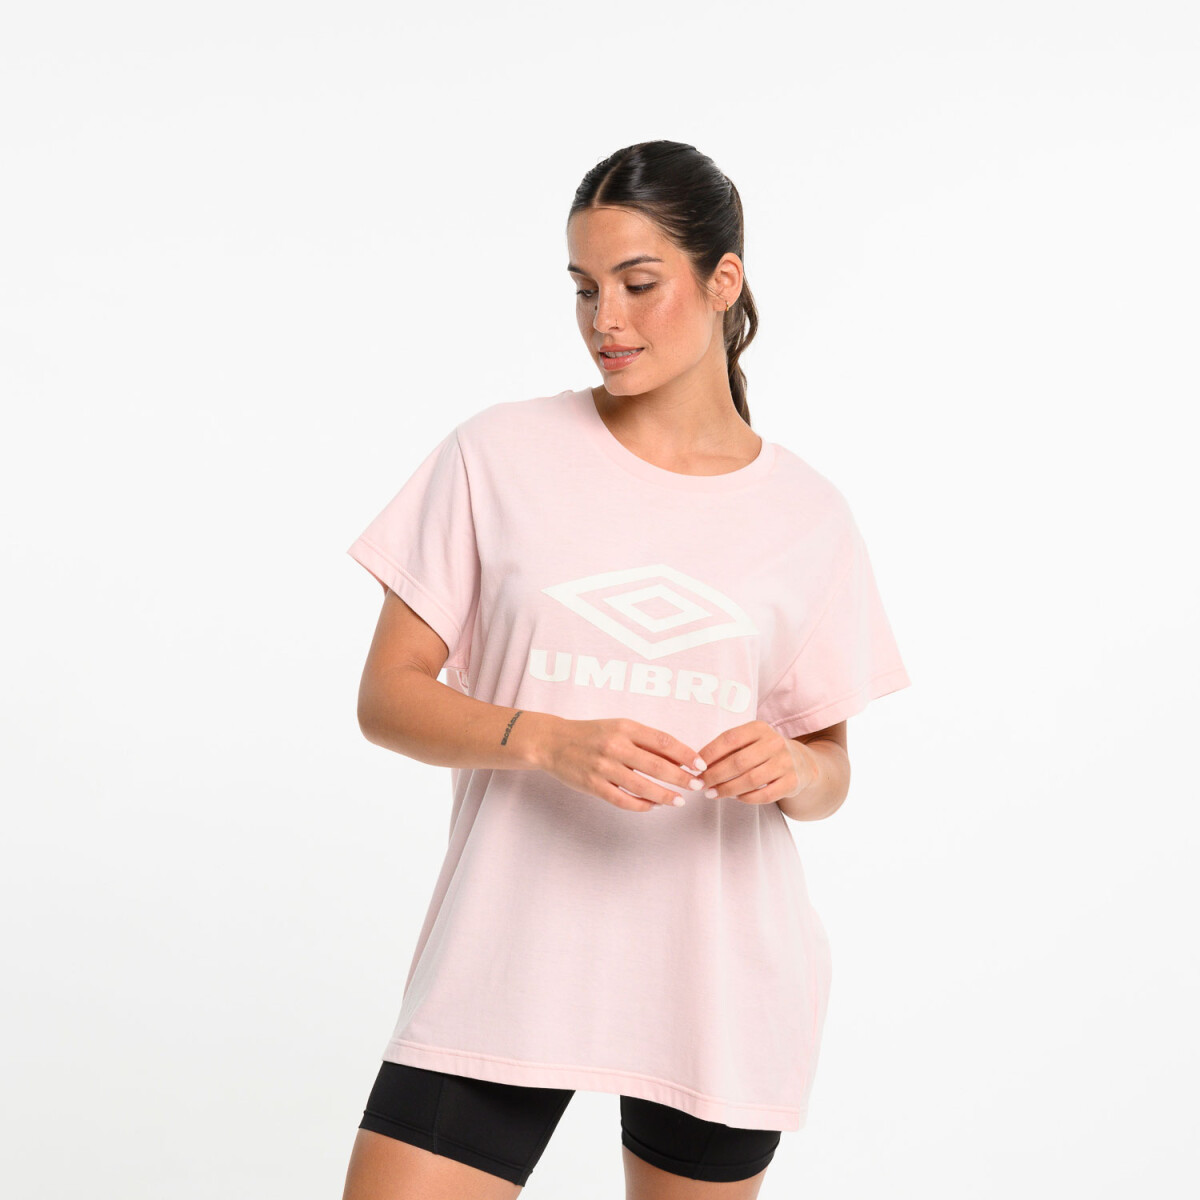 Remera Over Umbro Mujer - 0r9 